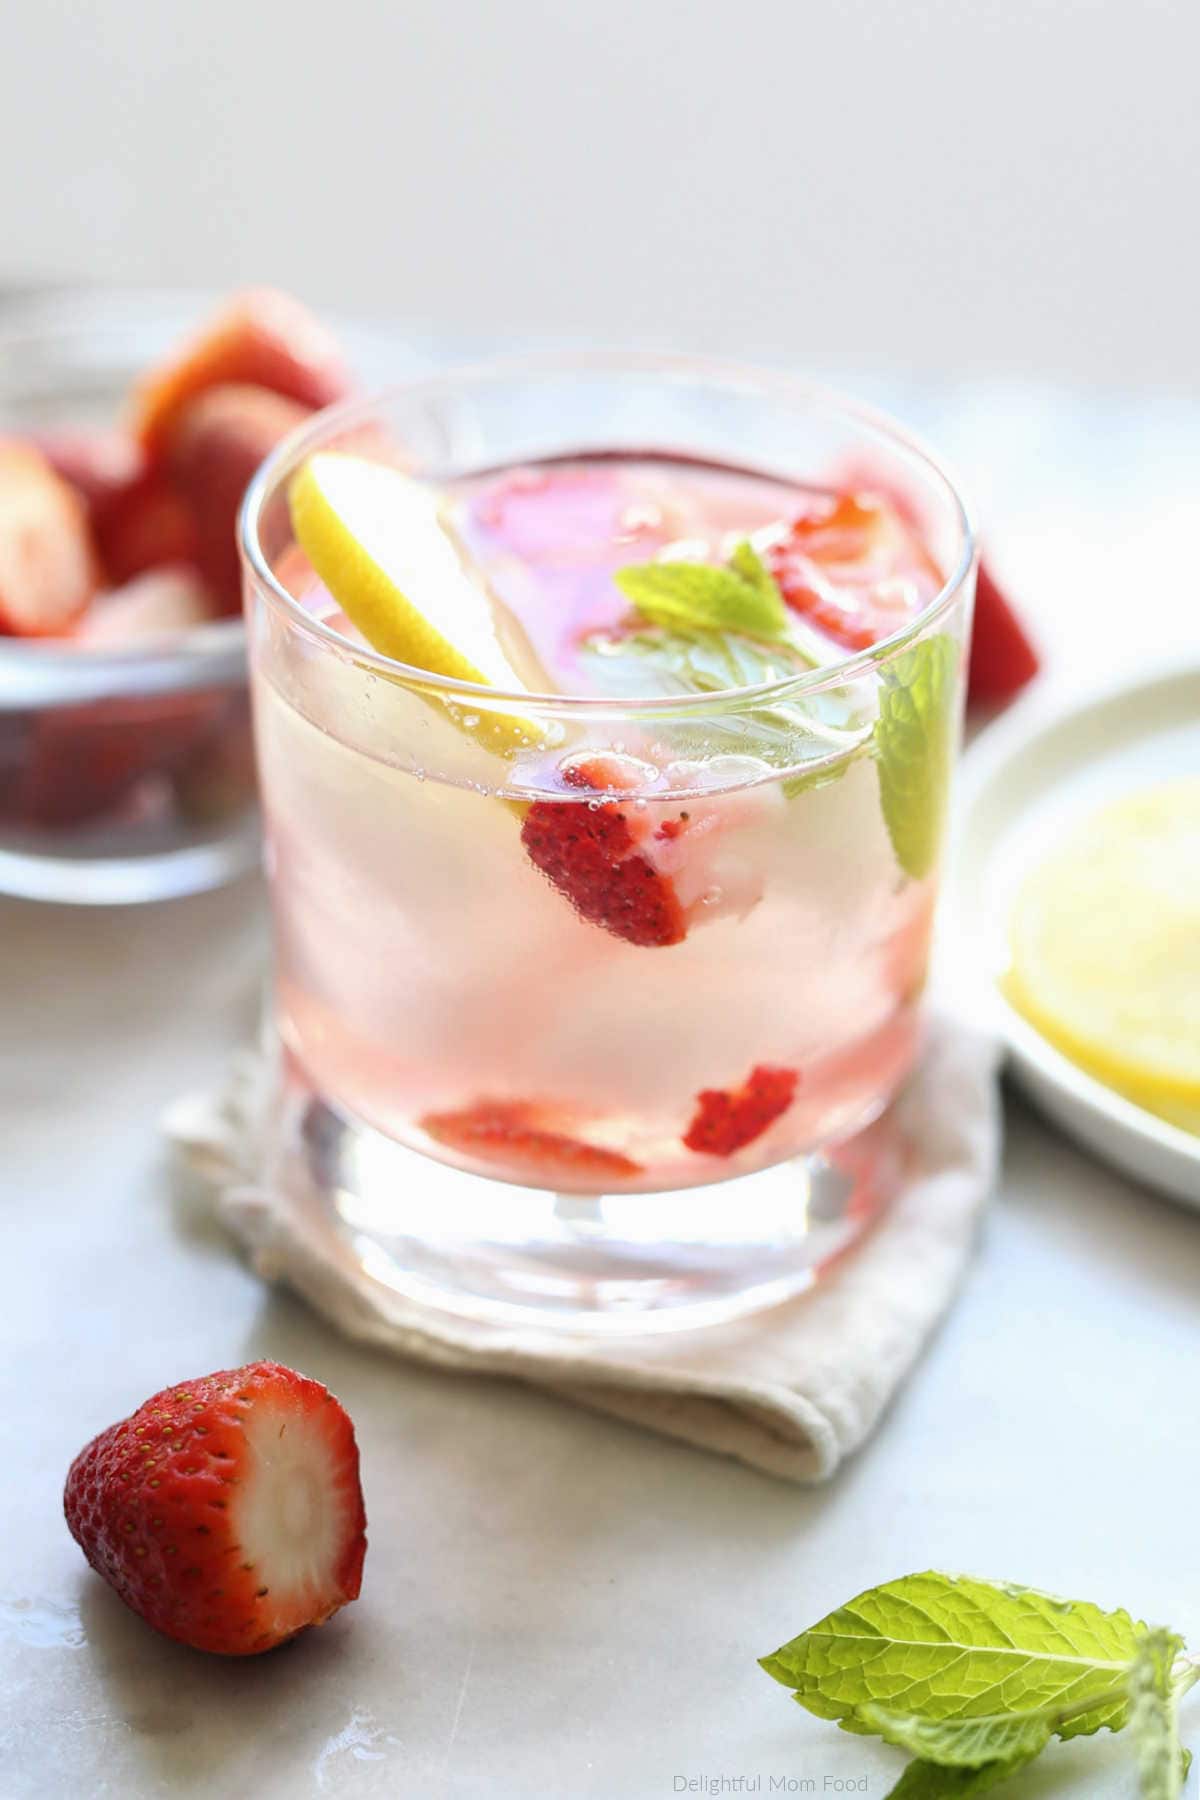 strawberry, lemon, mint infused into a detox water drink served in a glass